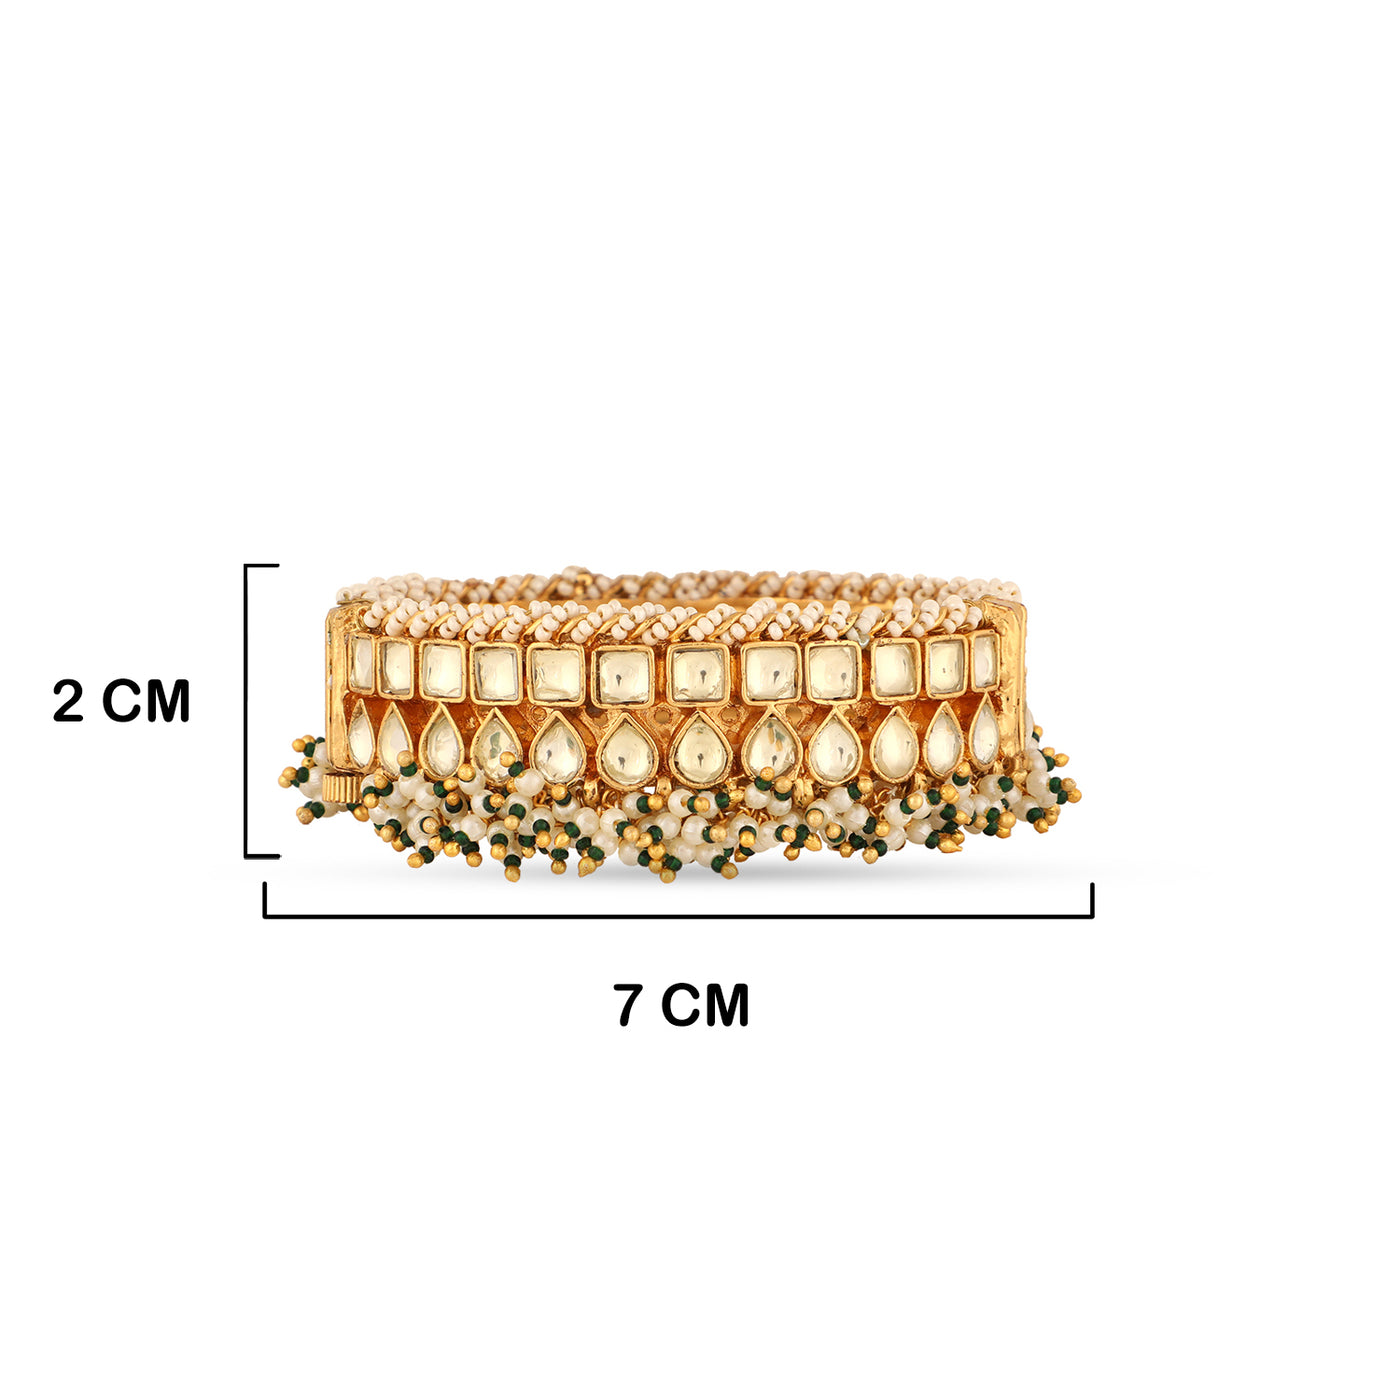 Ivory Bead Kundan Bangle with measurements in cm. 2cm by 7cm.